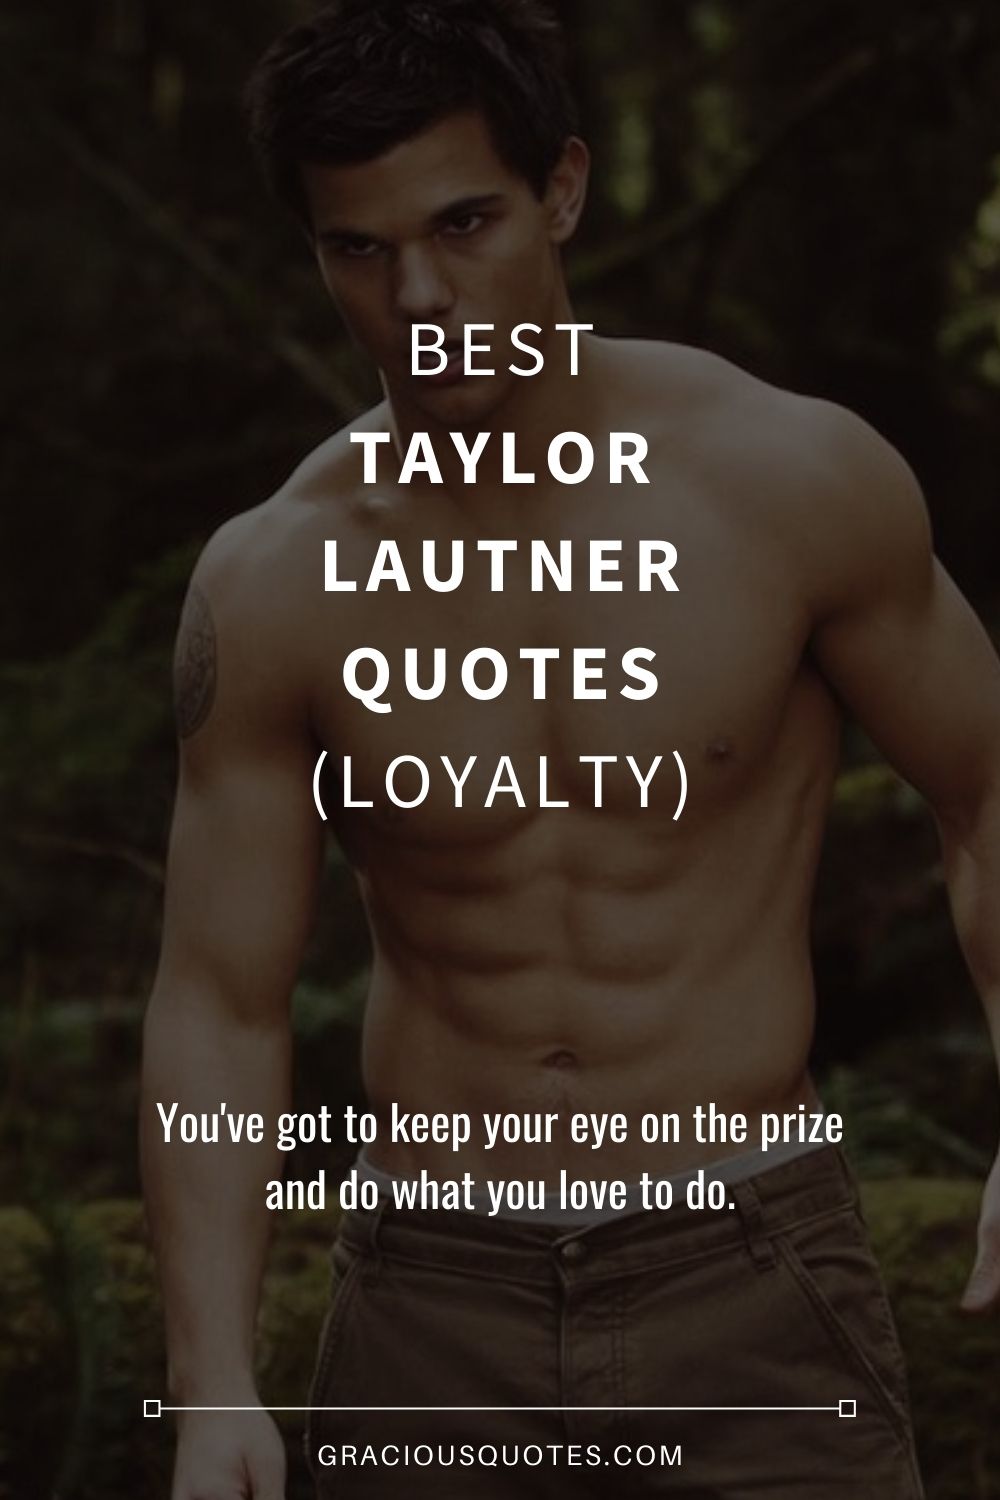 Best Taylor Lautner Quotes (LOYALTY) - Gracious Quotes